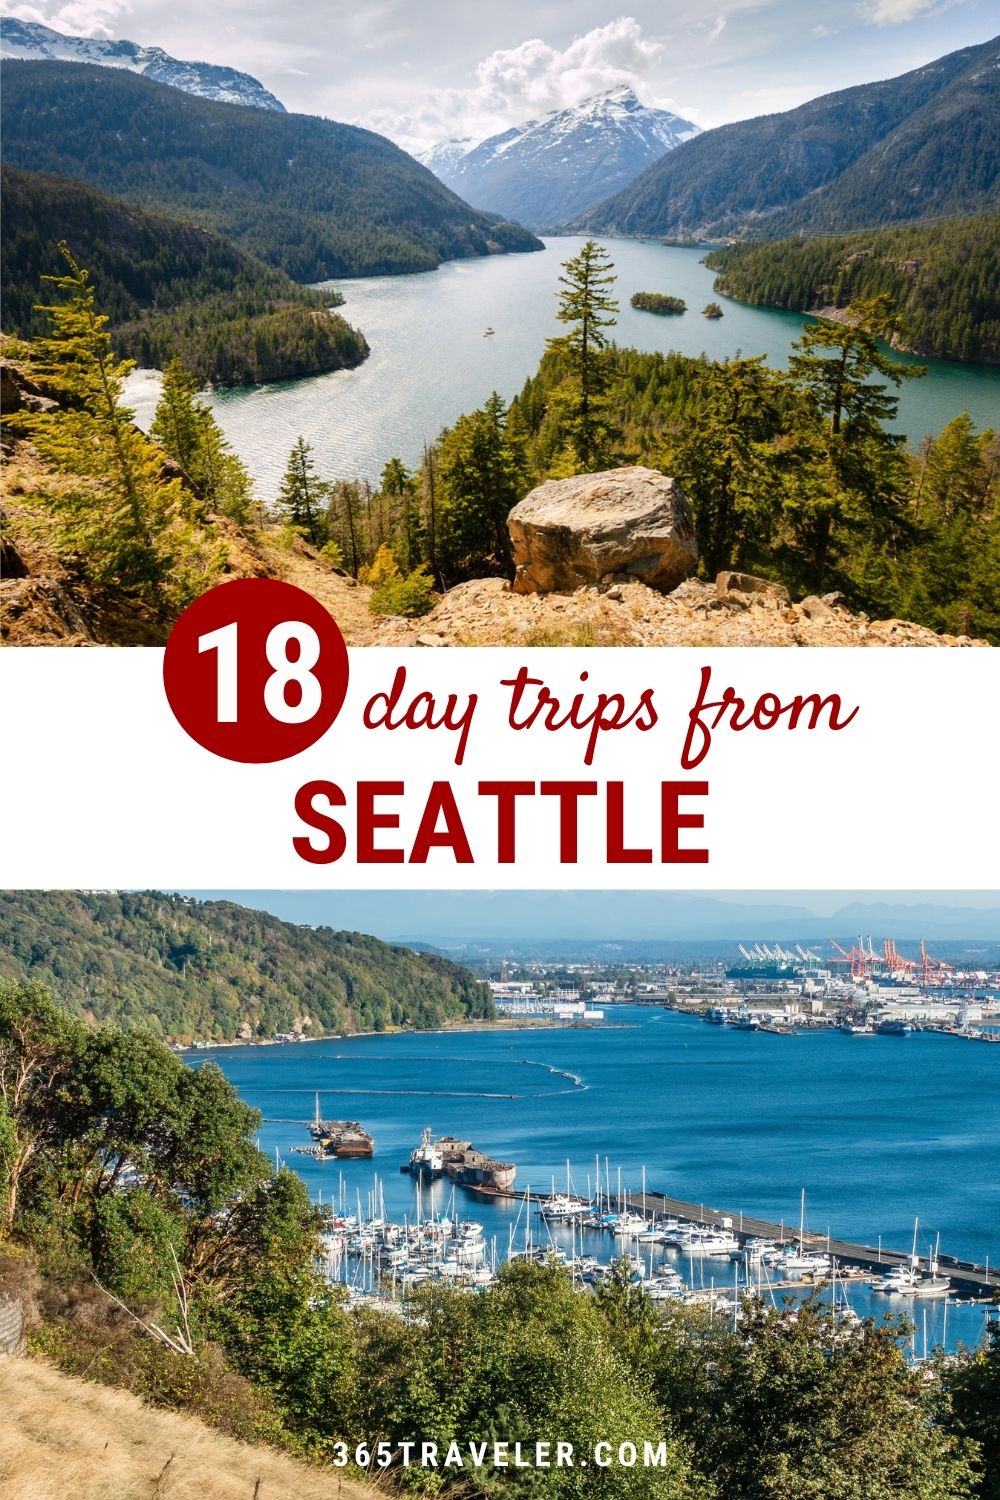 18 Fantastic Day Trips From Seattle You’ll Love